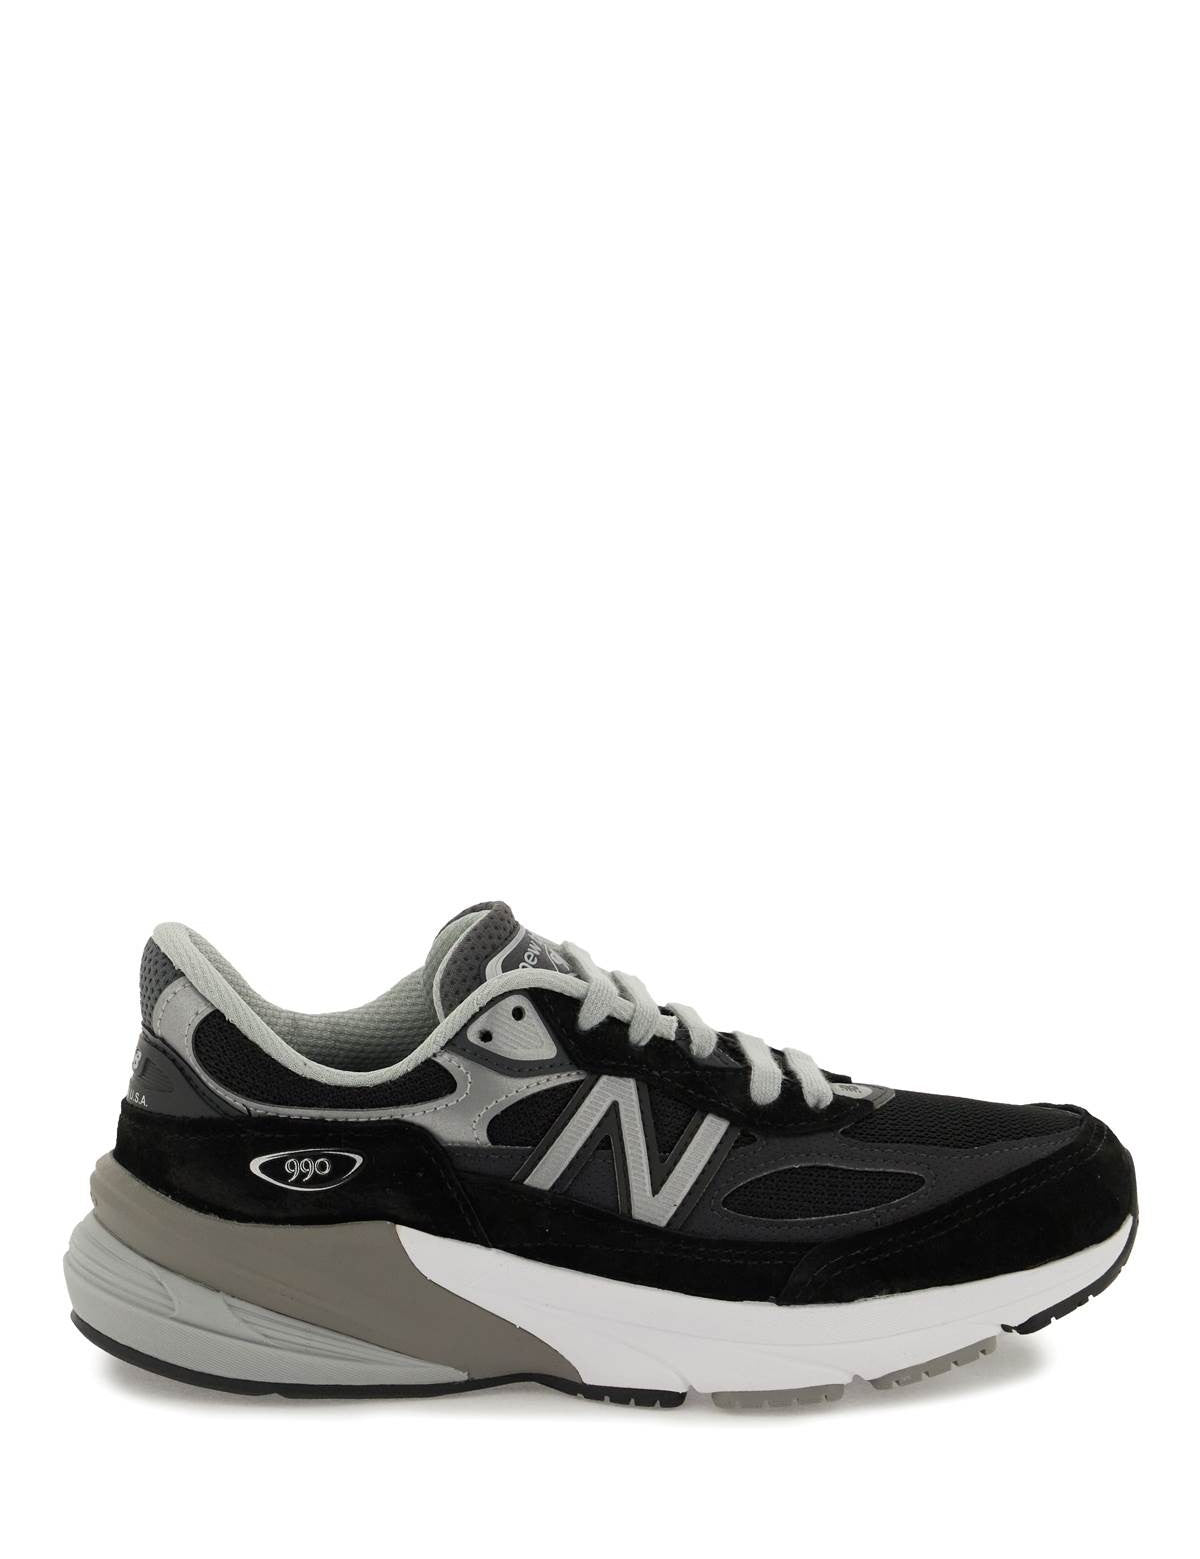 new-balance-made-in-usa-990v6-sneakers_d0af3a0a-b902-439f-a2a2-88bbd3d47008.jpg